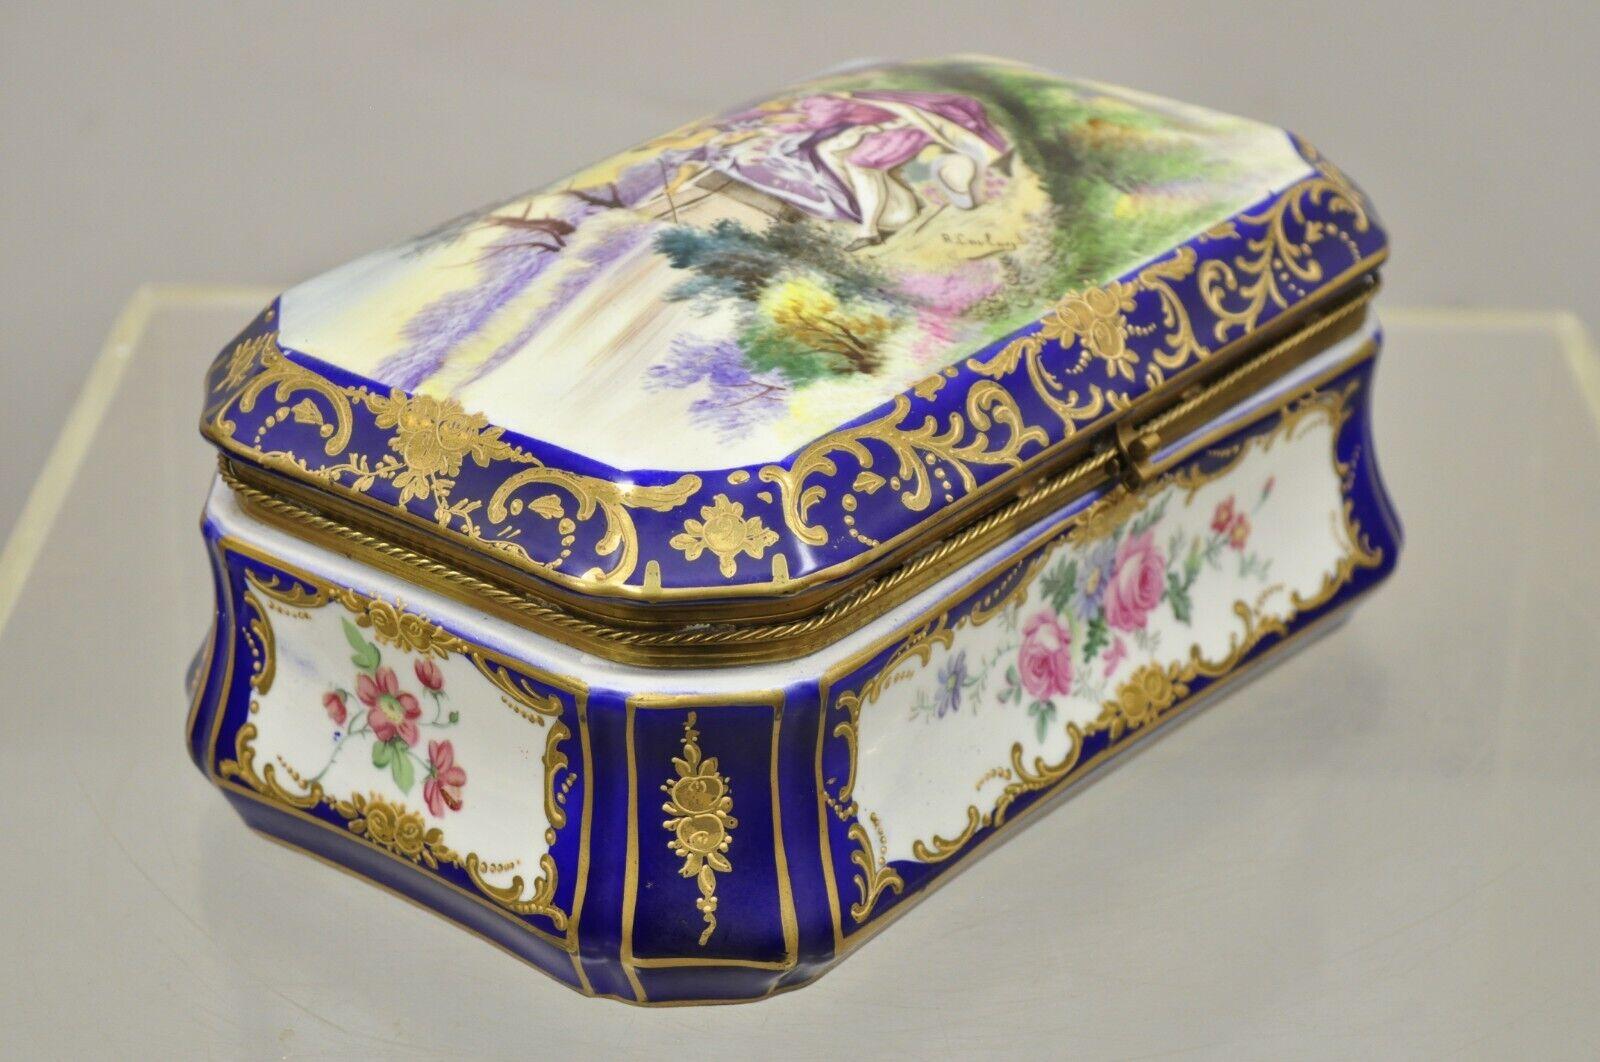 Vintage French Victorian blue porcelain hand painted hinged box signed R. Coulory. Item features hand painted floral details, hand painted interior, courting scene to lid, signed 